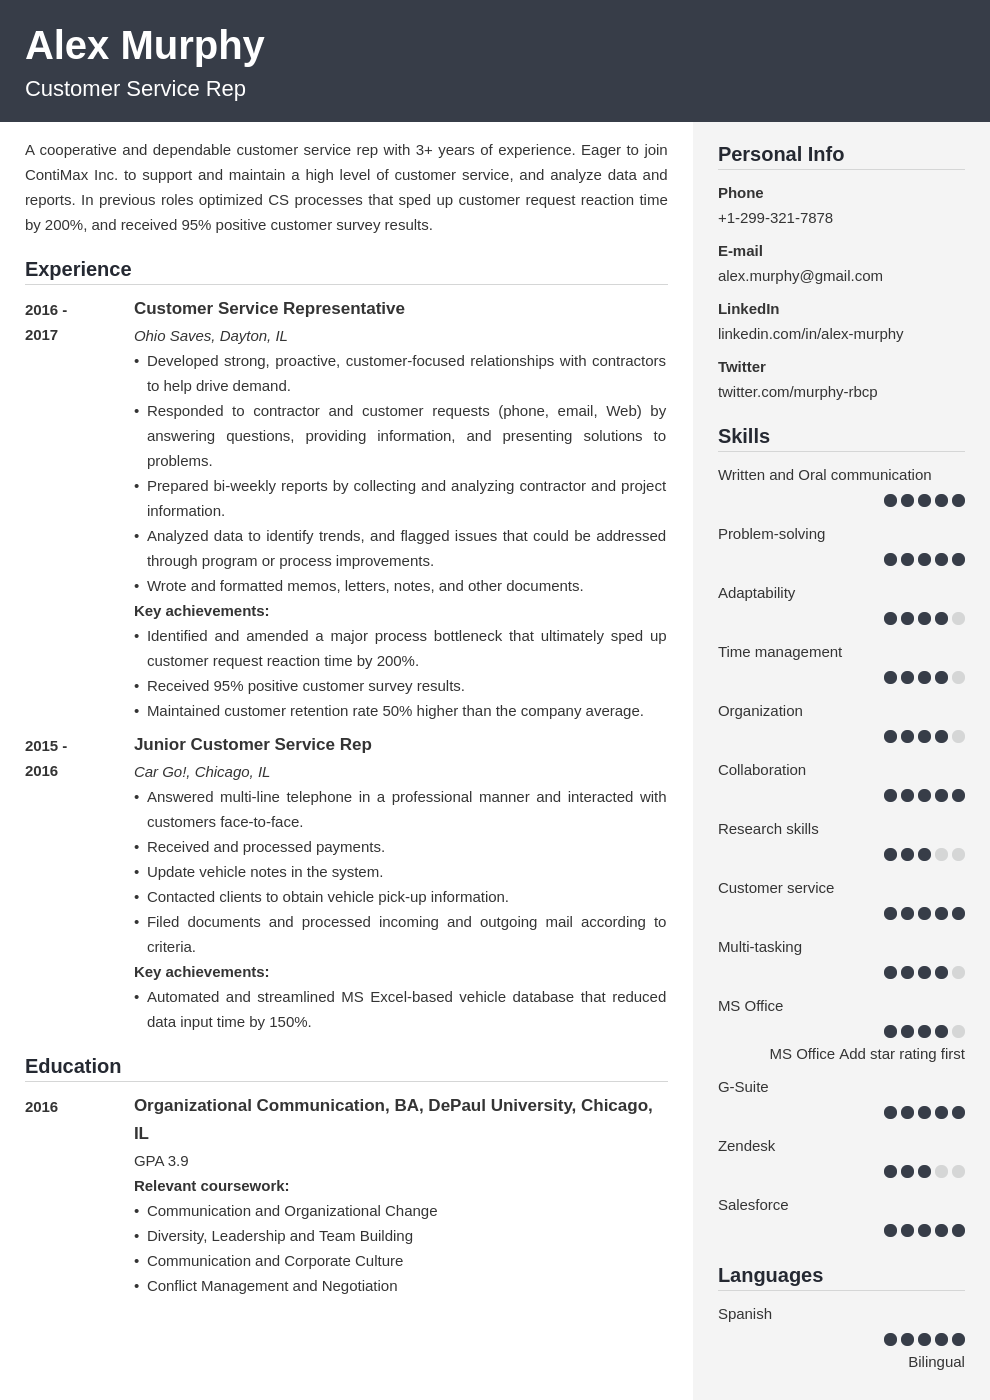 resume relevant coursework resume template cubic